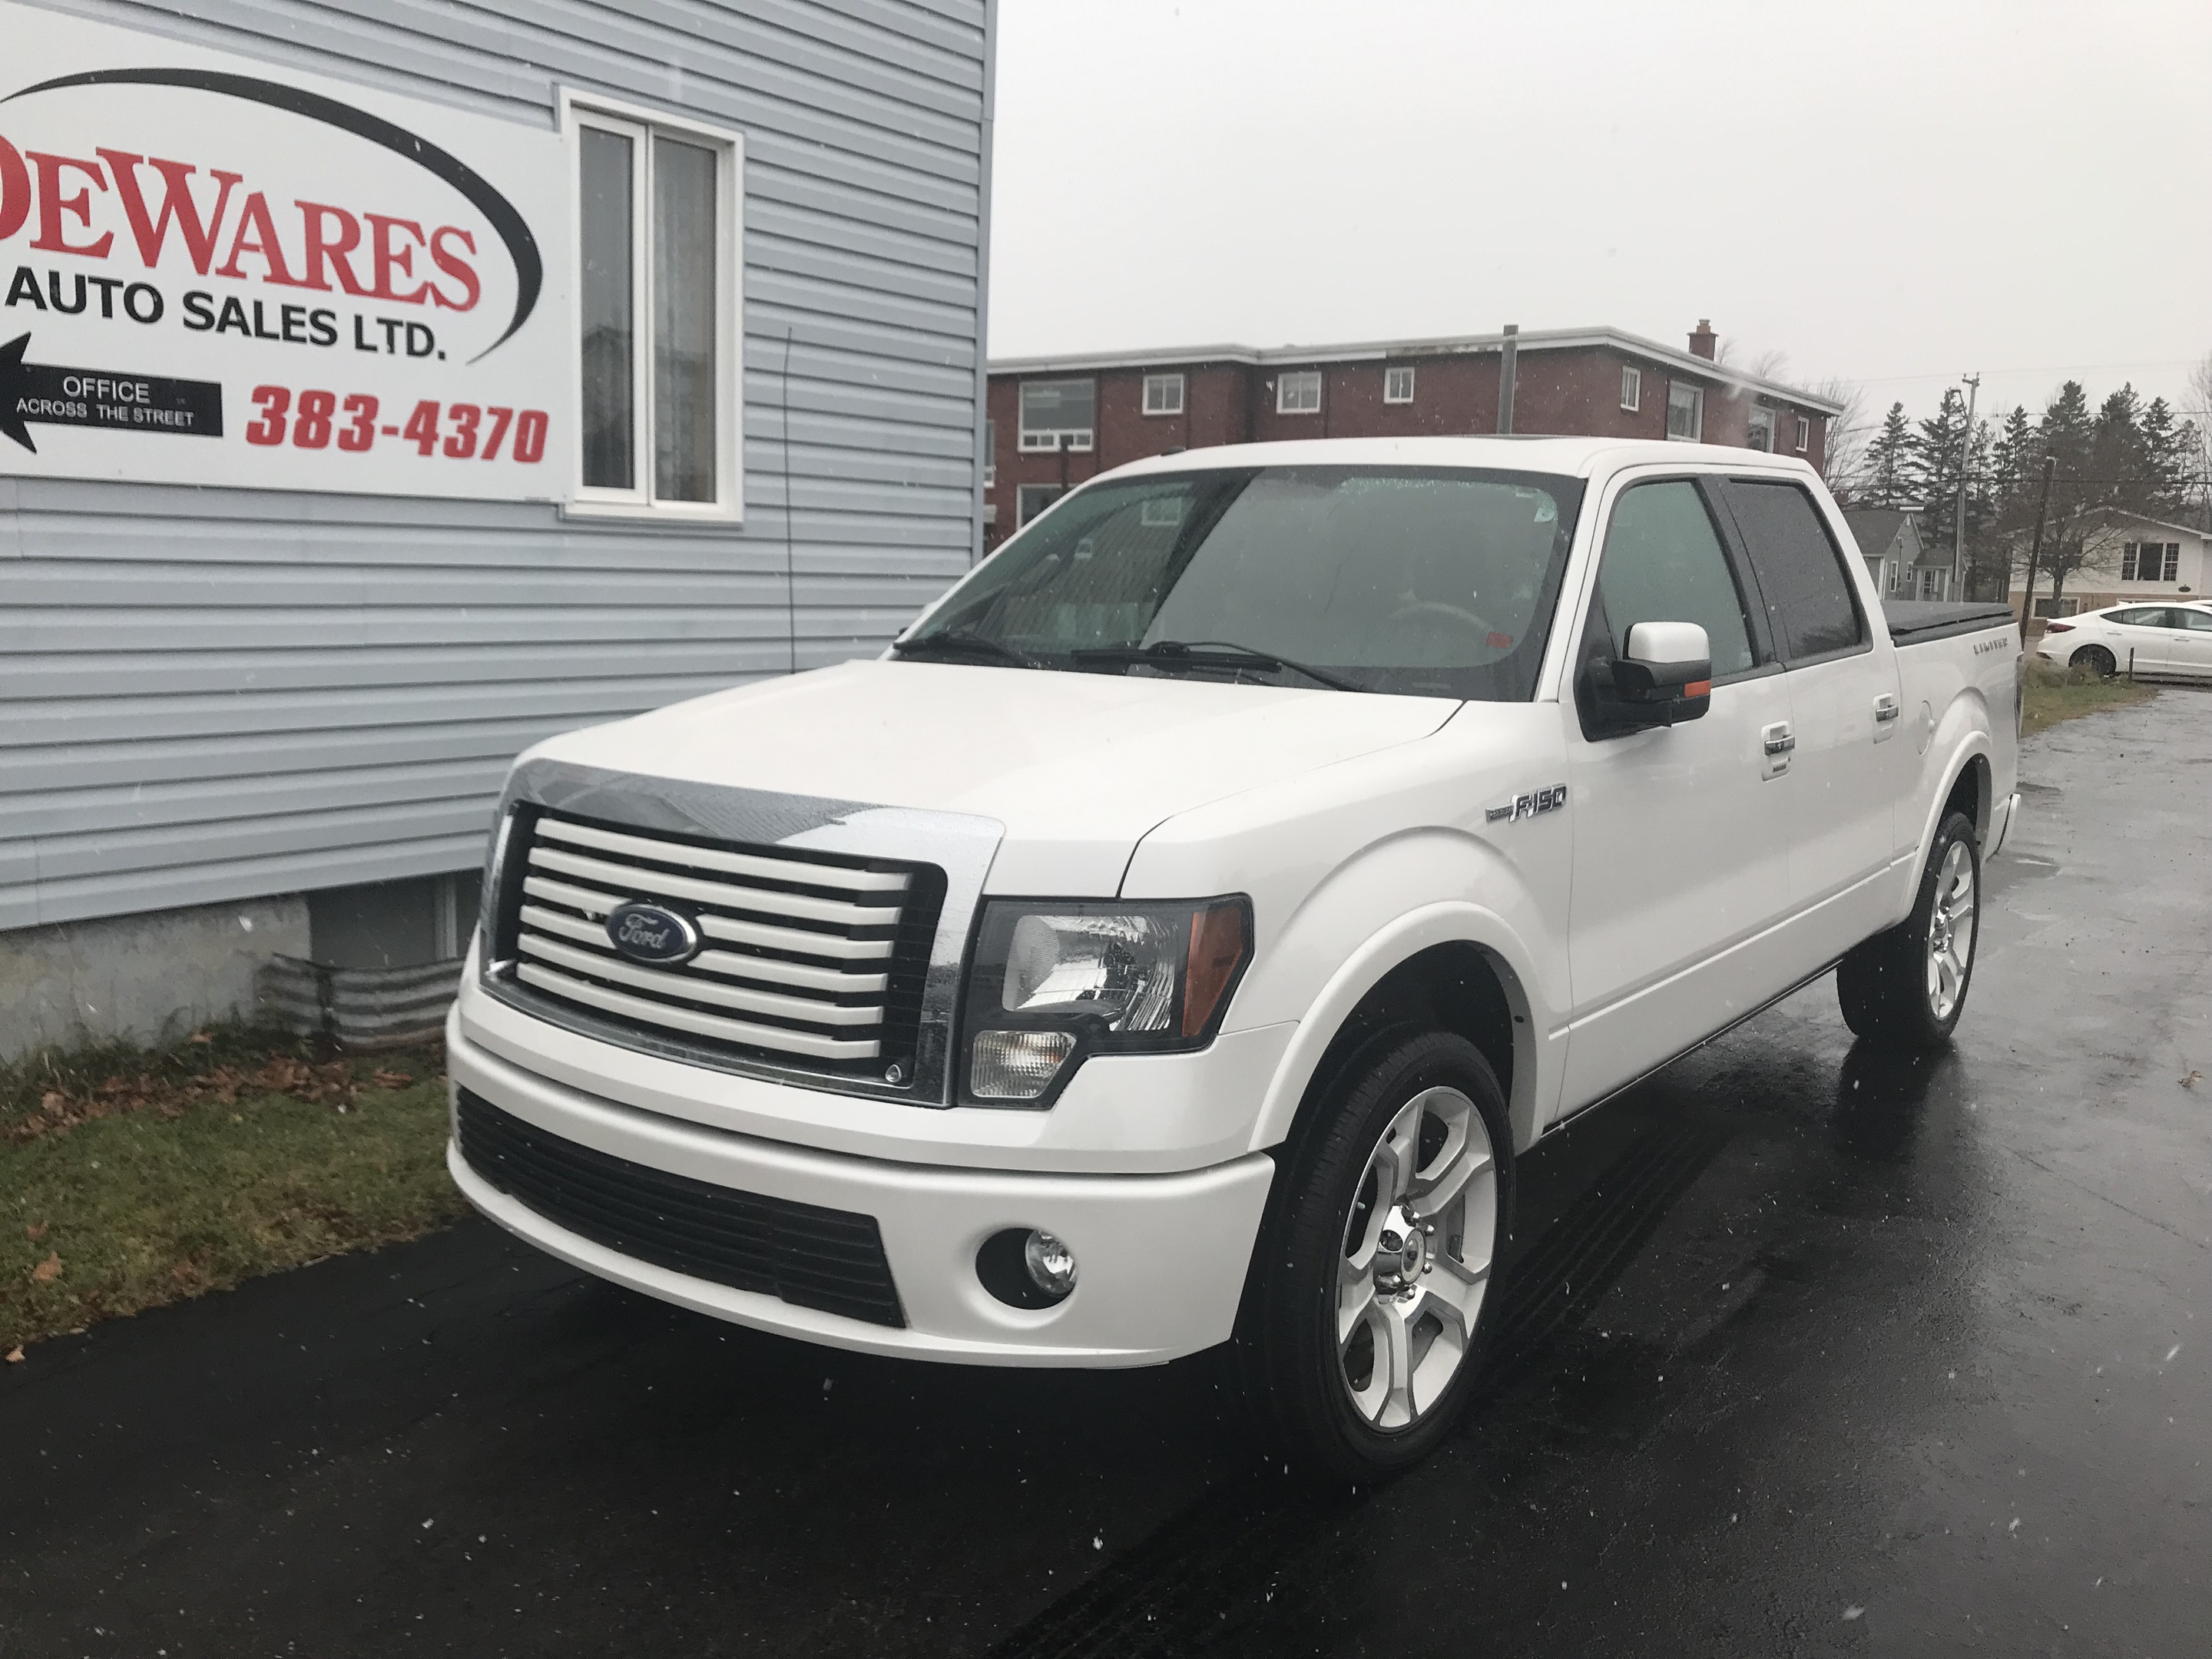 2011 Ford F-150 - AWD SuperCrew Lariat Limited - WINTER STORED !! 